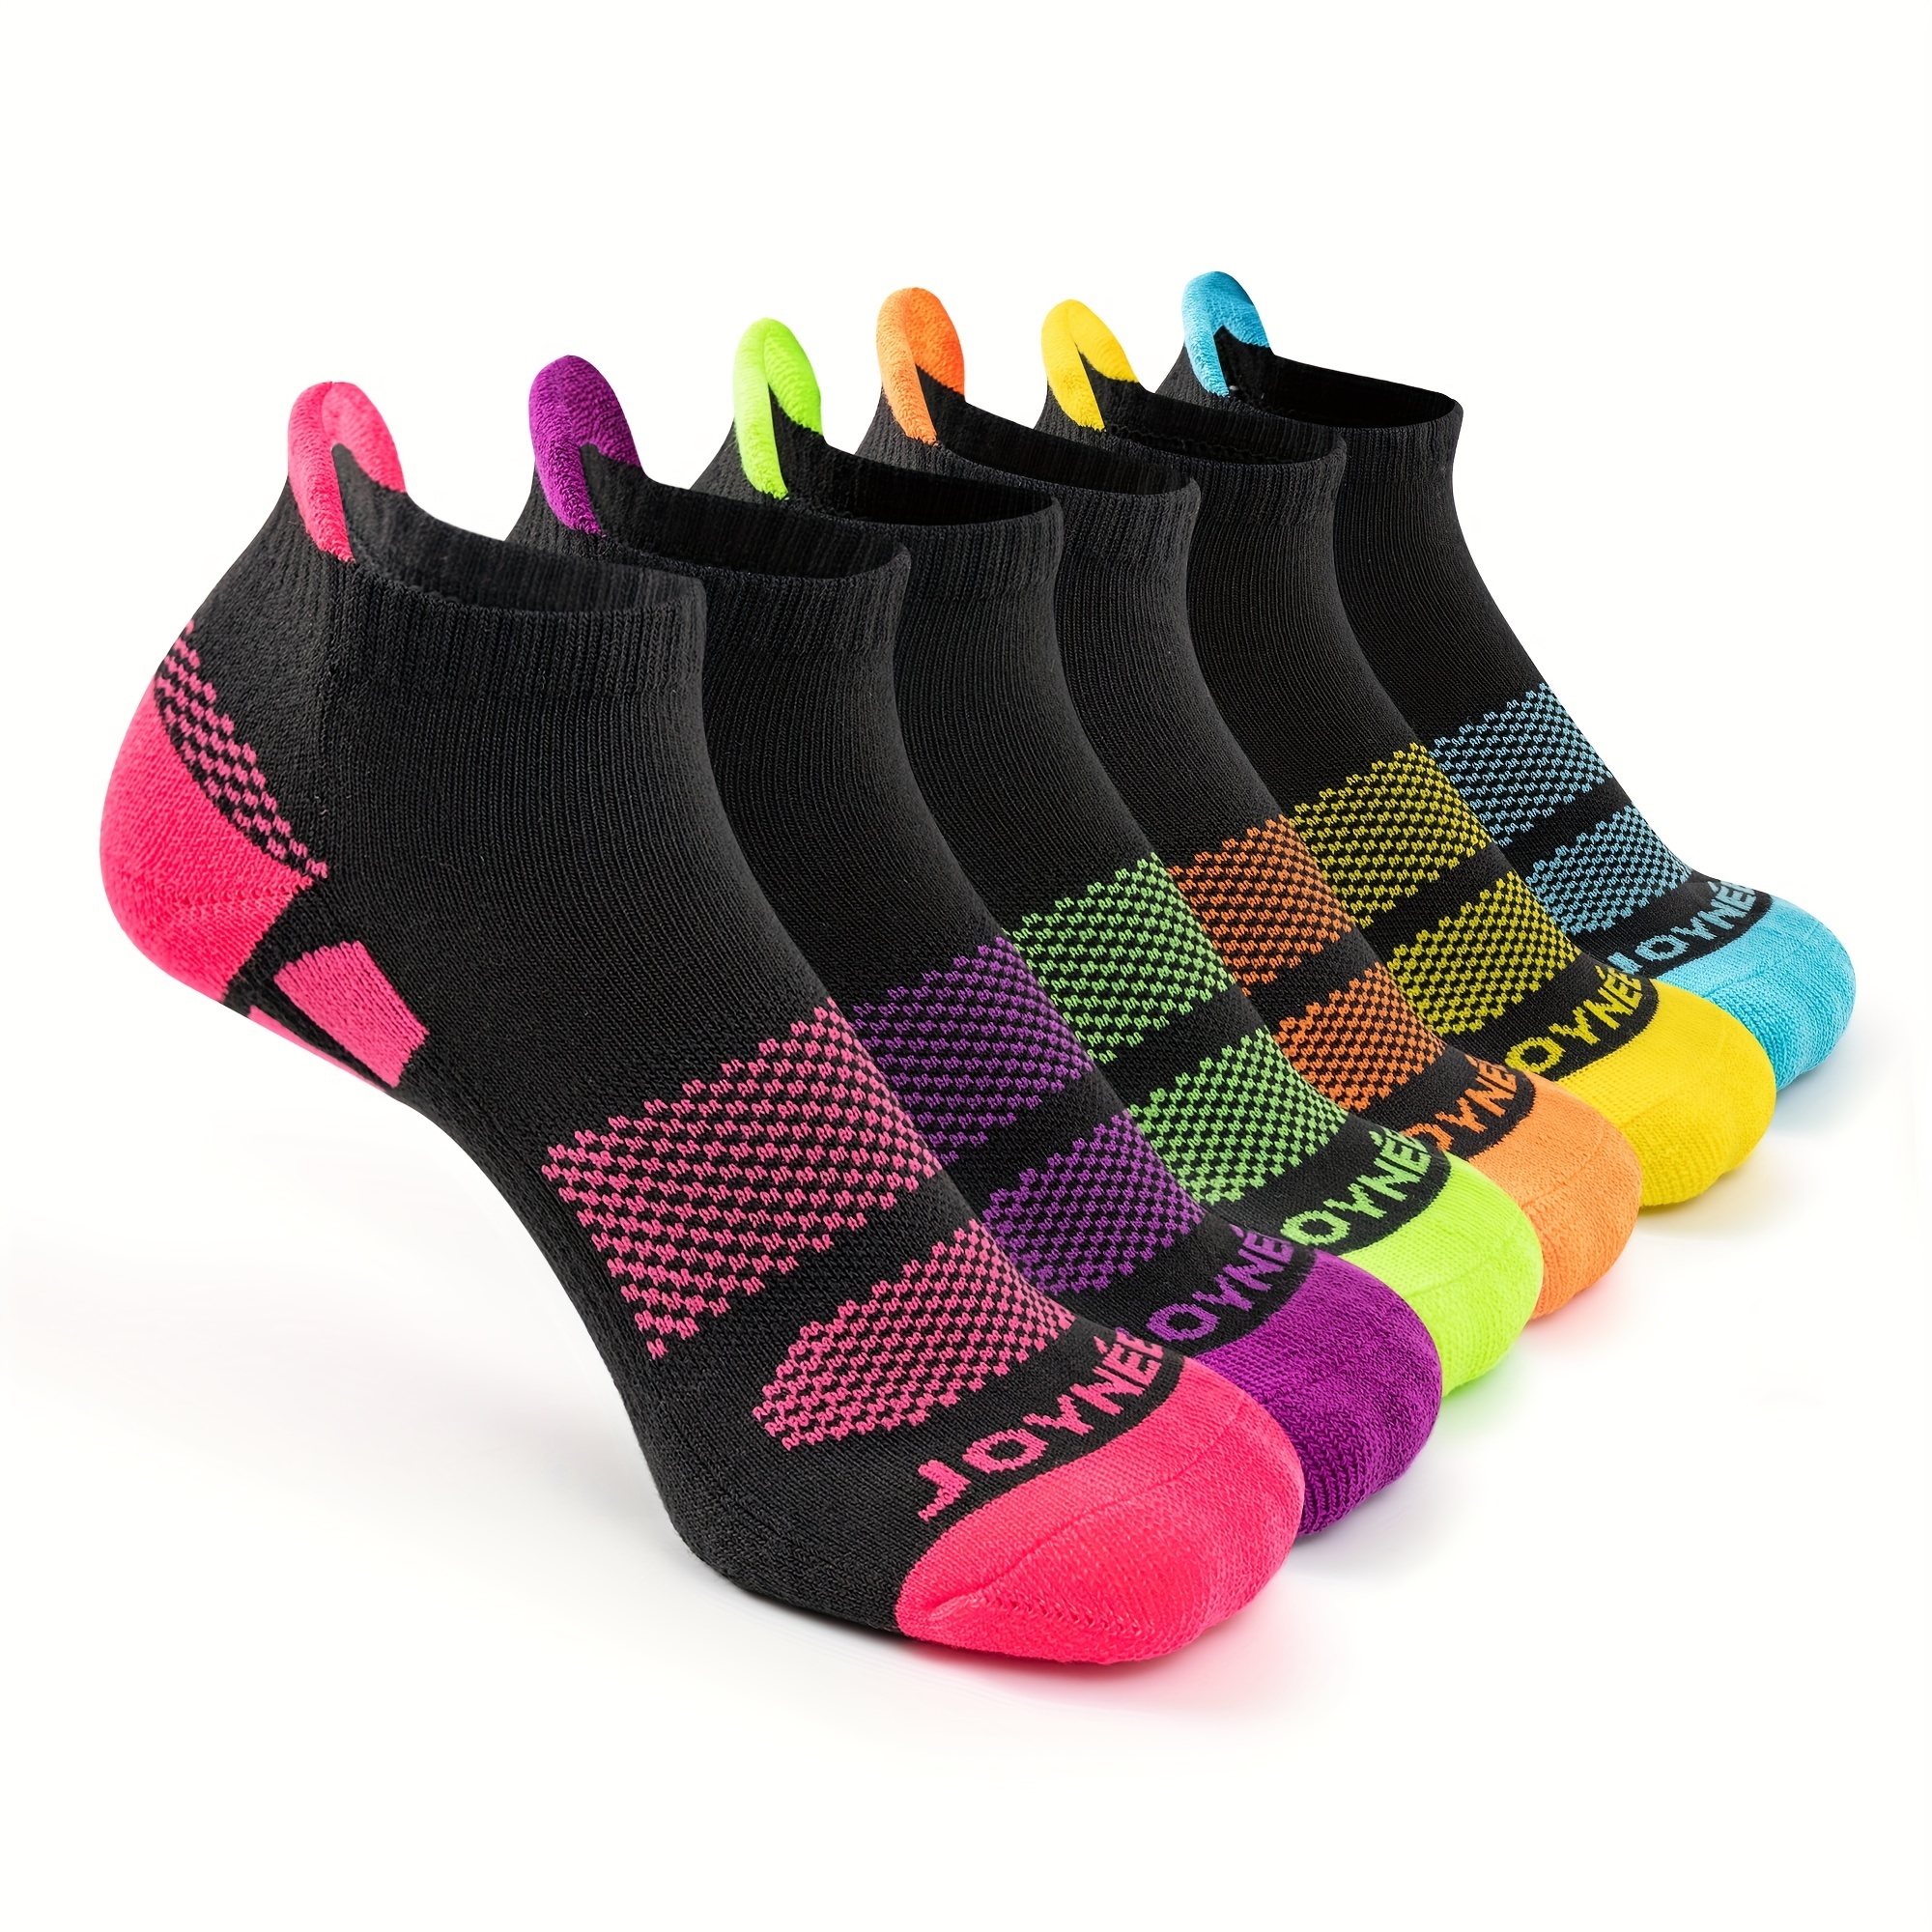 

Acefine 6 Pairs Classic Colorblock Sports Socks, Unisex Casual Comfy Ankle Socks For Athletic Fitness, Women's Stockings & Hosiery